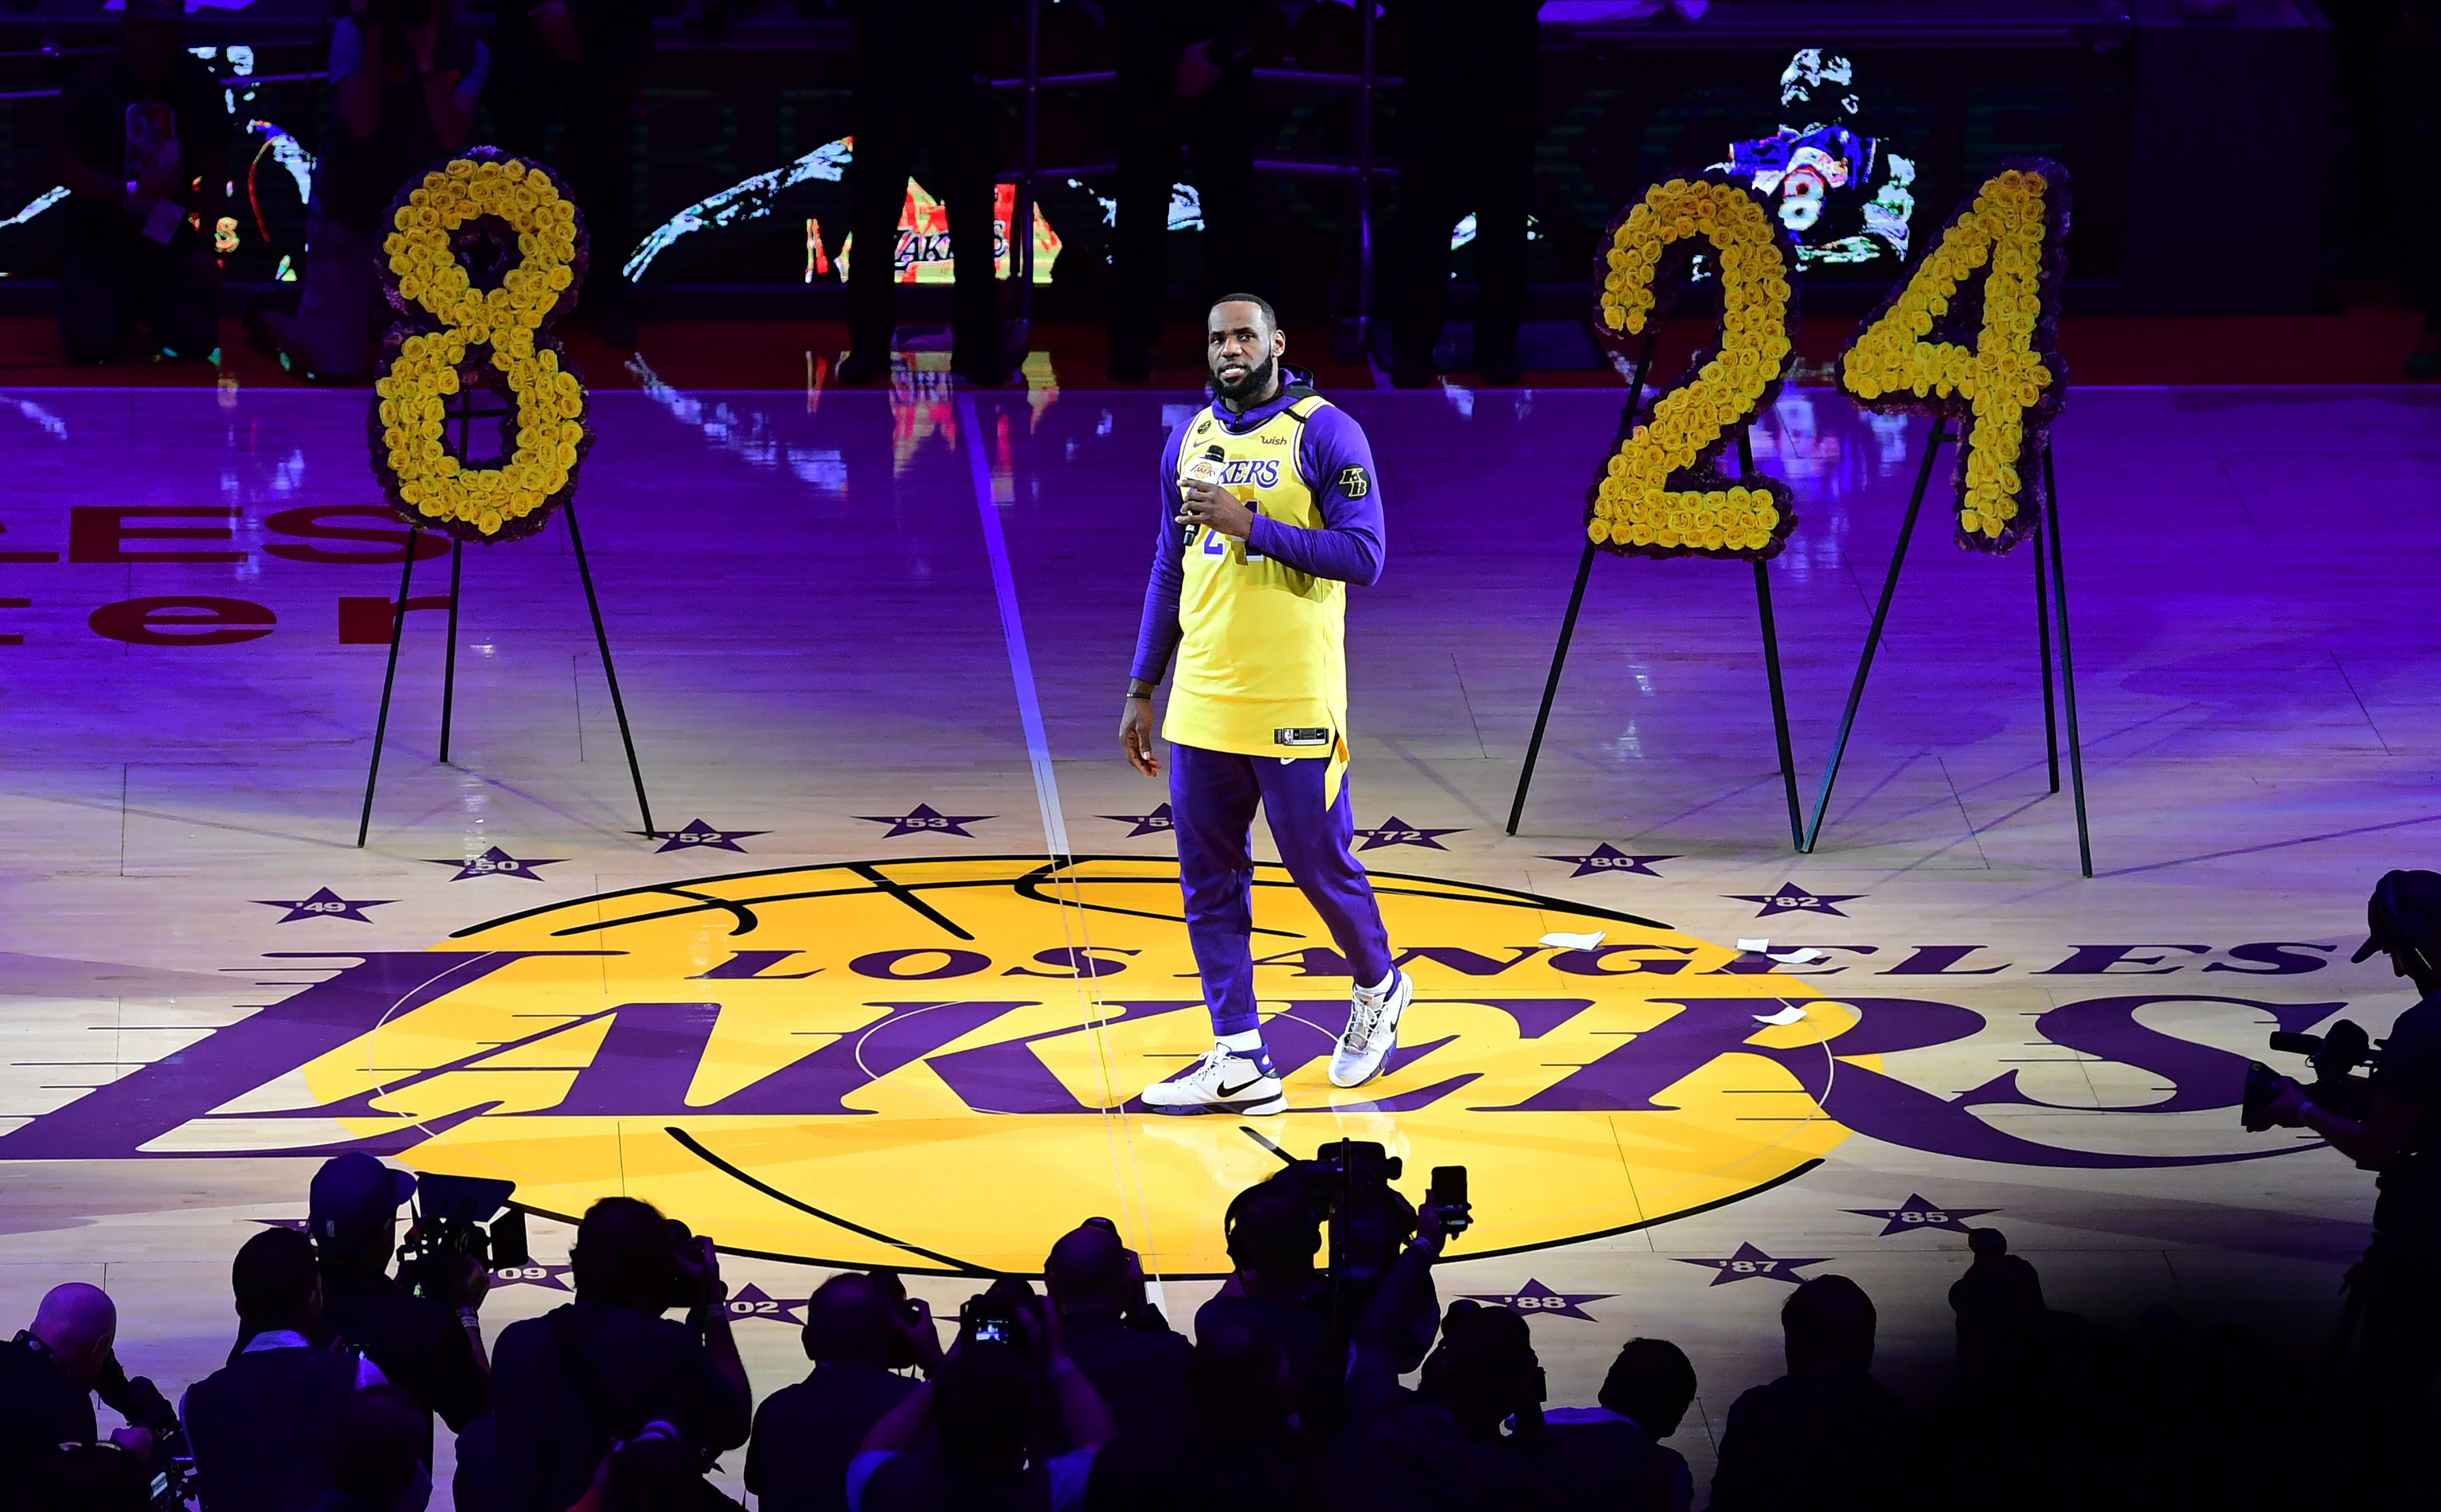 Los Angeles Lakers' first game after Kobe Bryant's death